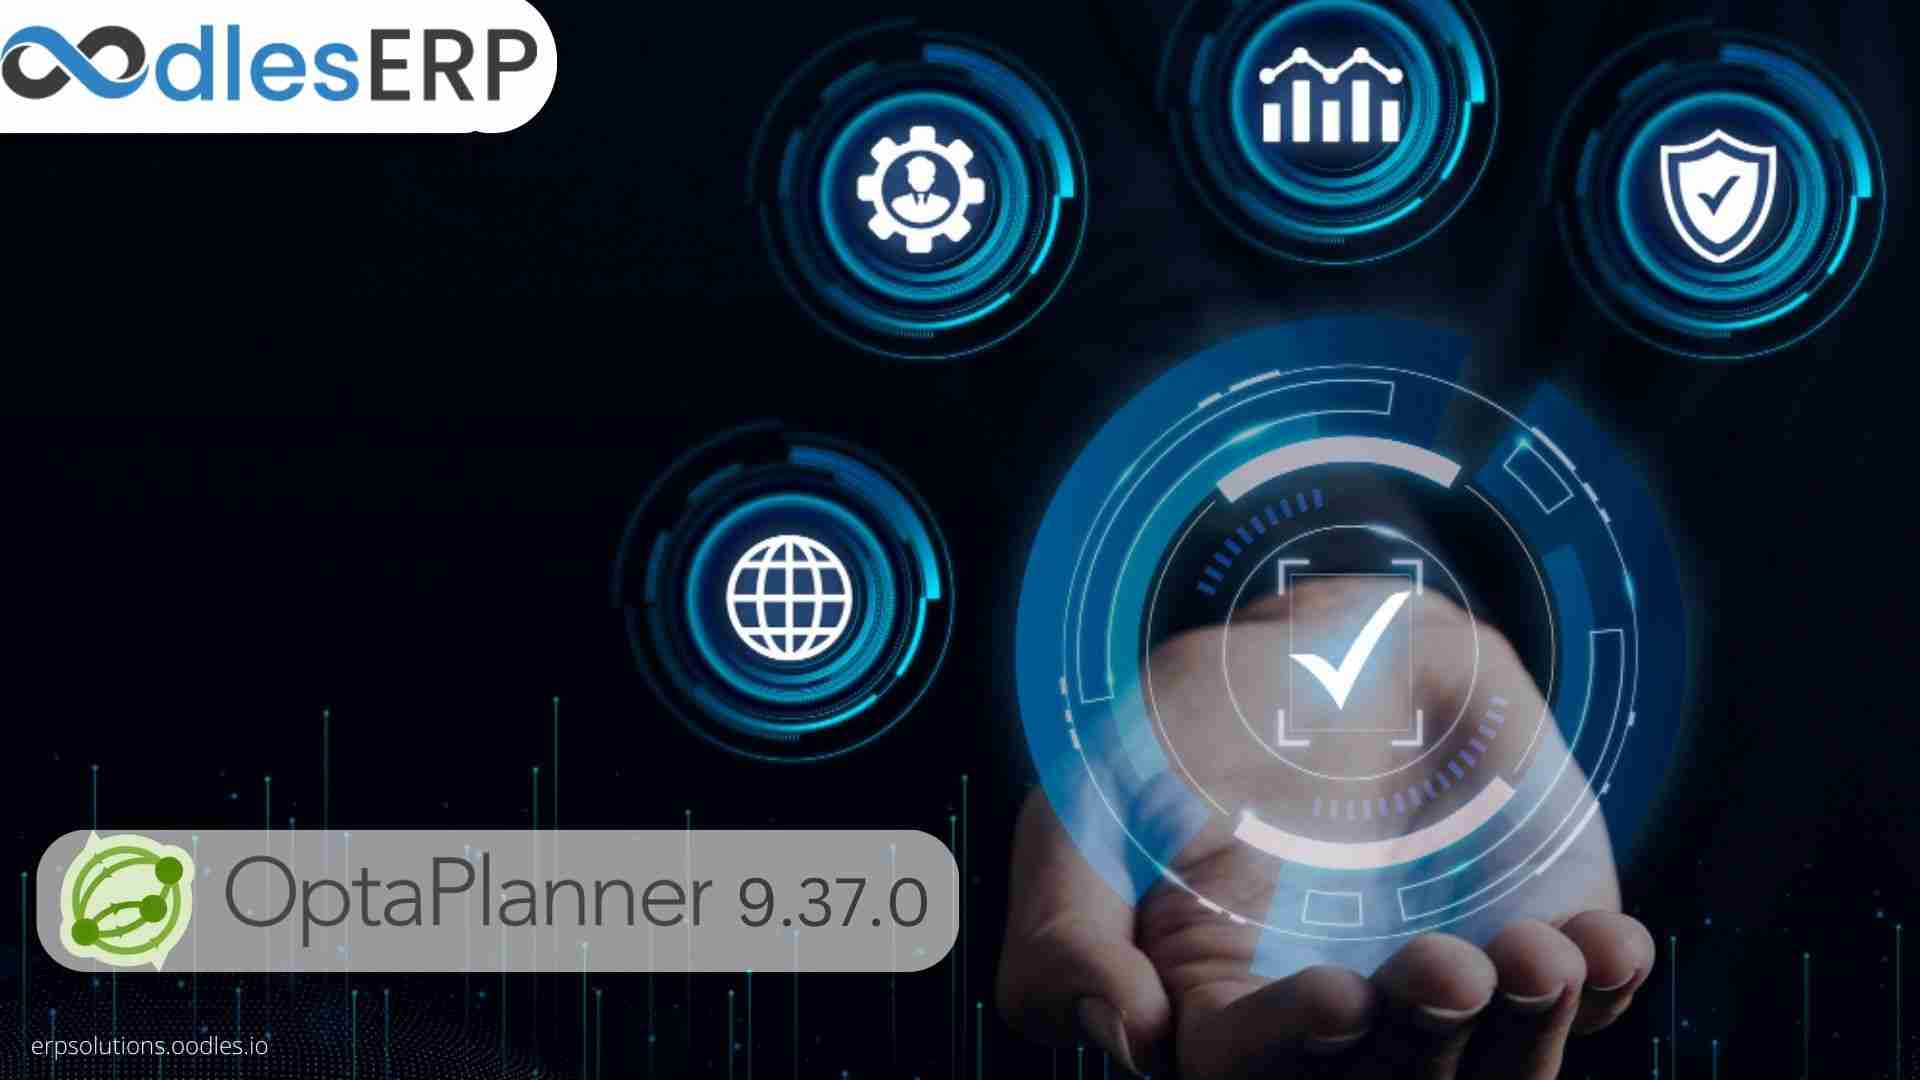 OptaPlanner Ver. 9: Here’s Everything You Need To Know